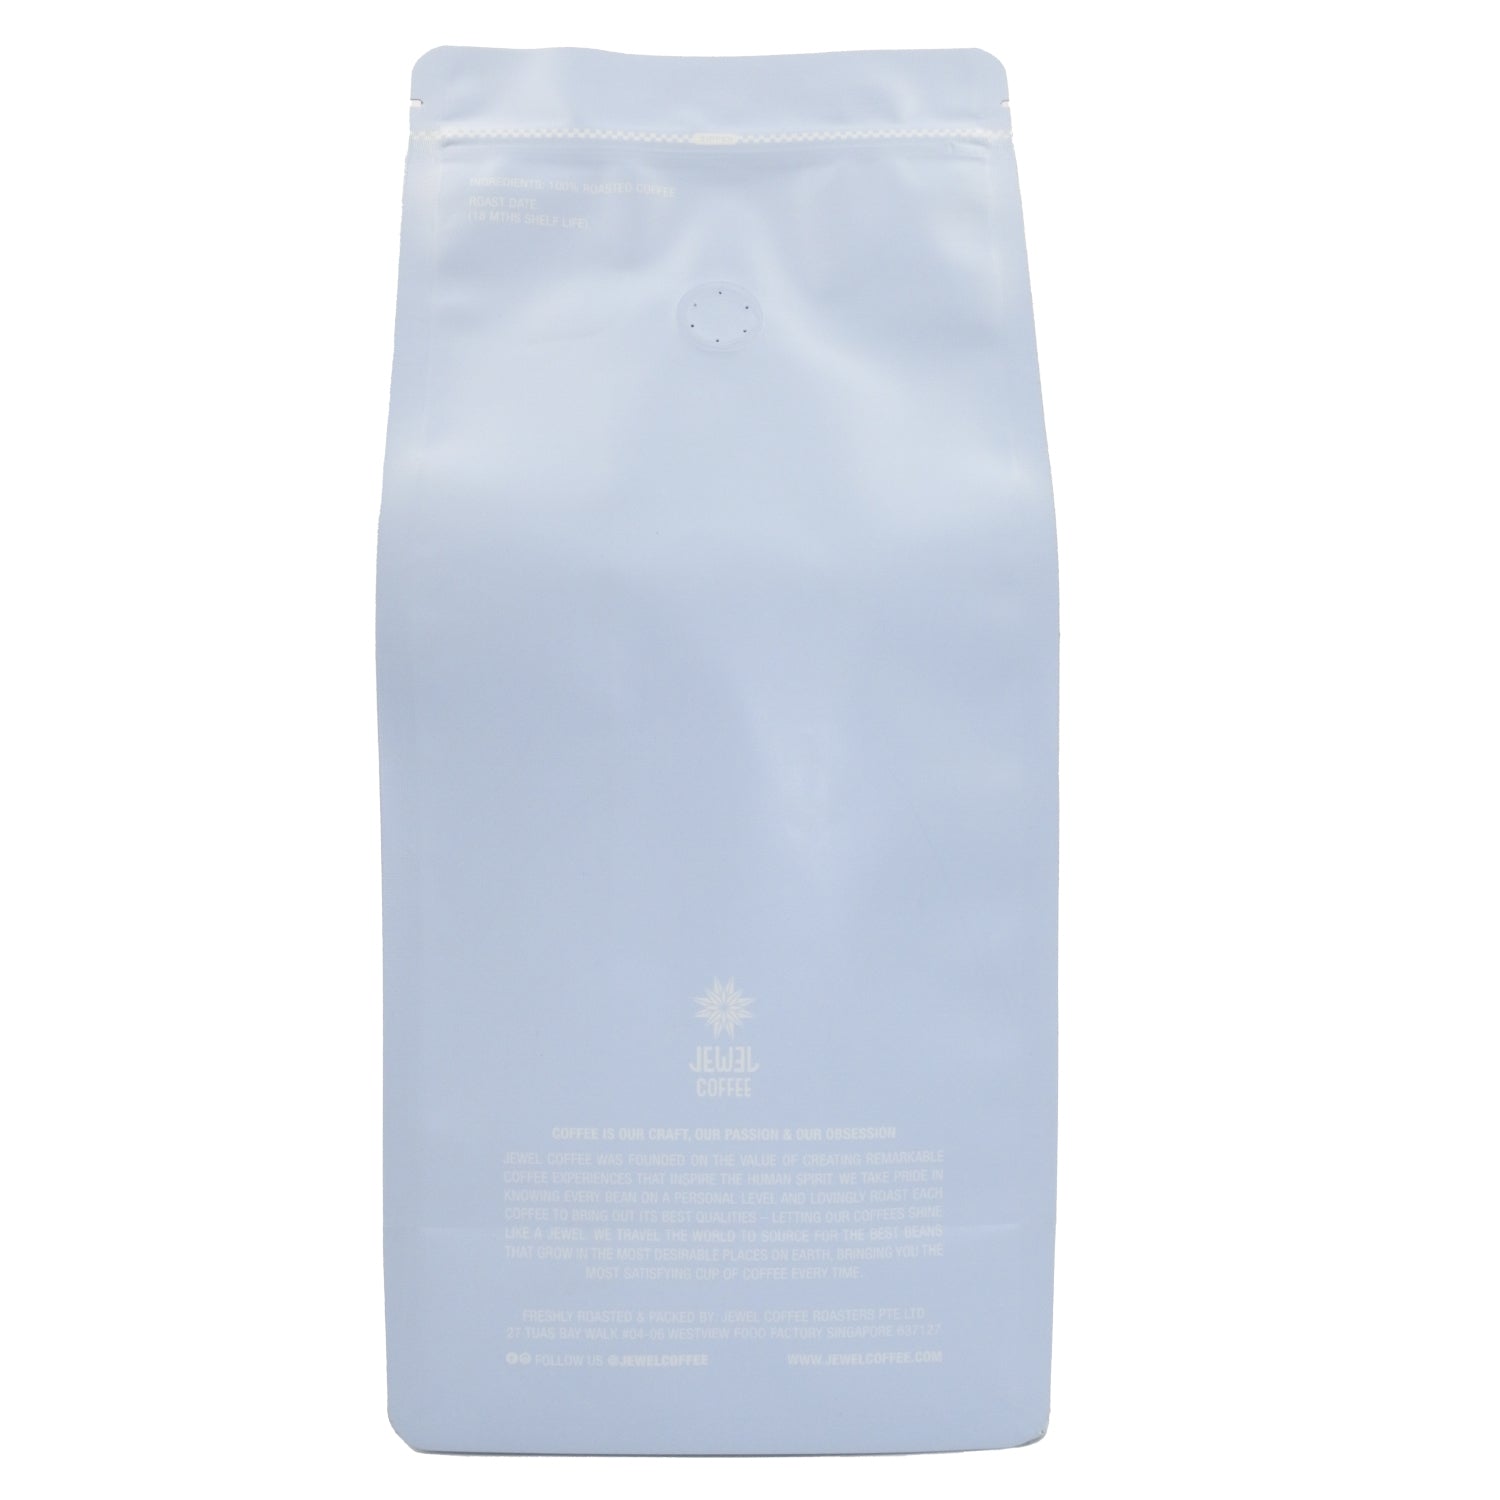 Decaf Colombia 1kg